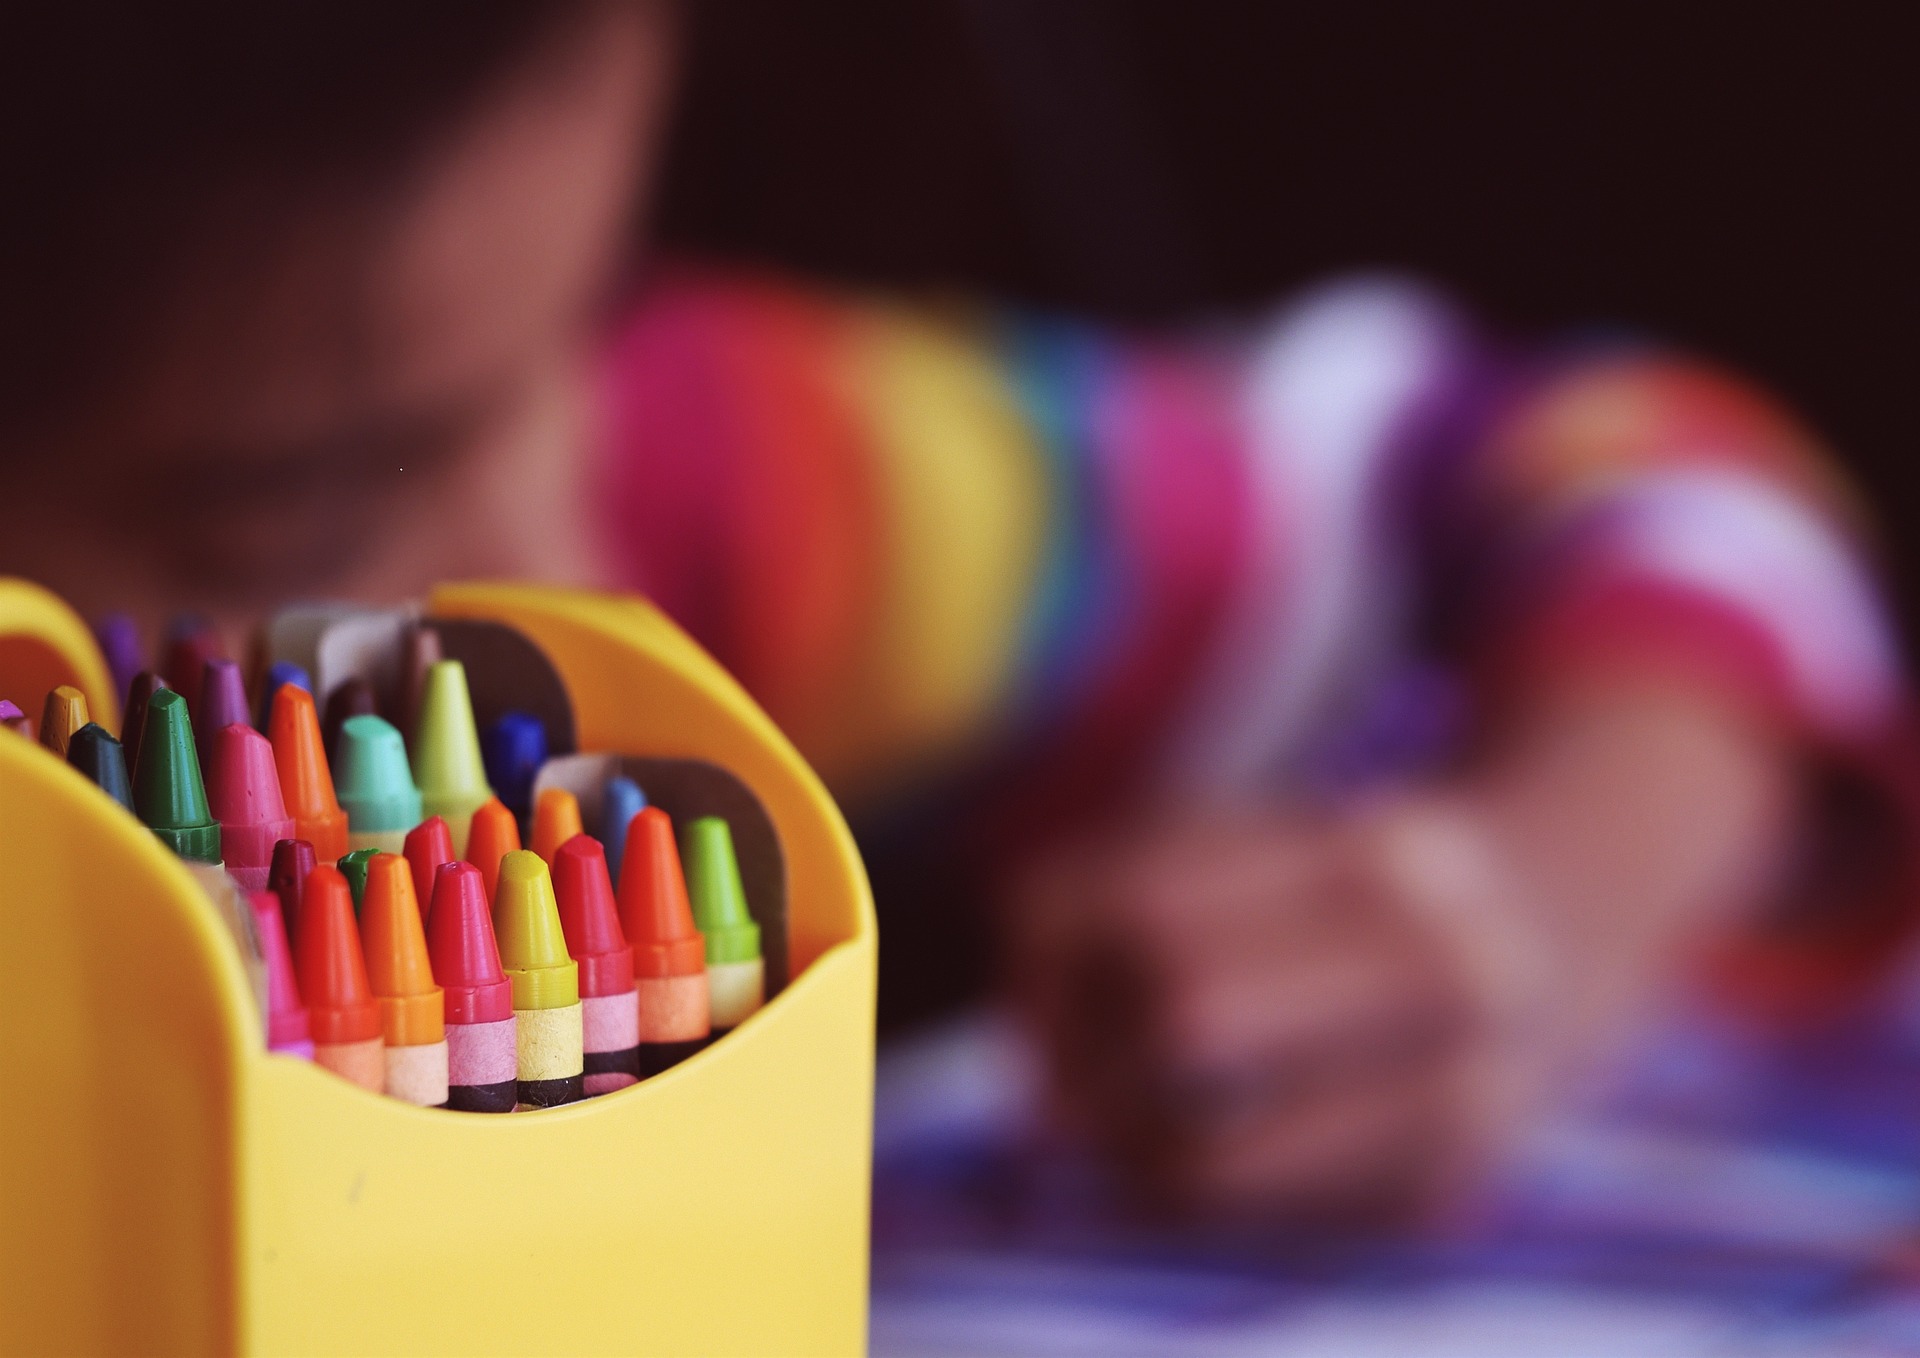 image of crayons with blurred image of child coloring in background